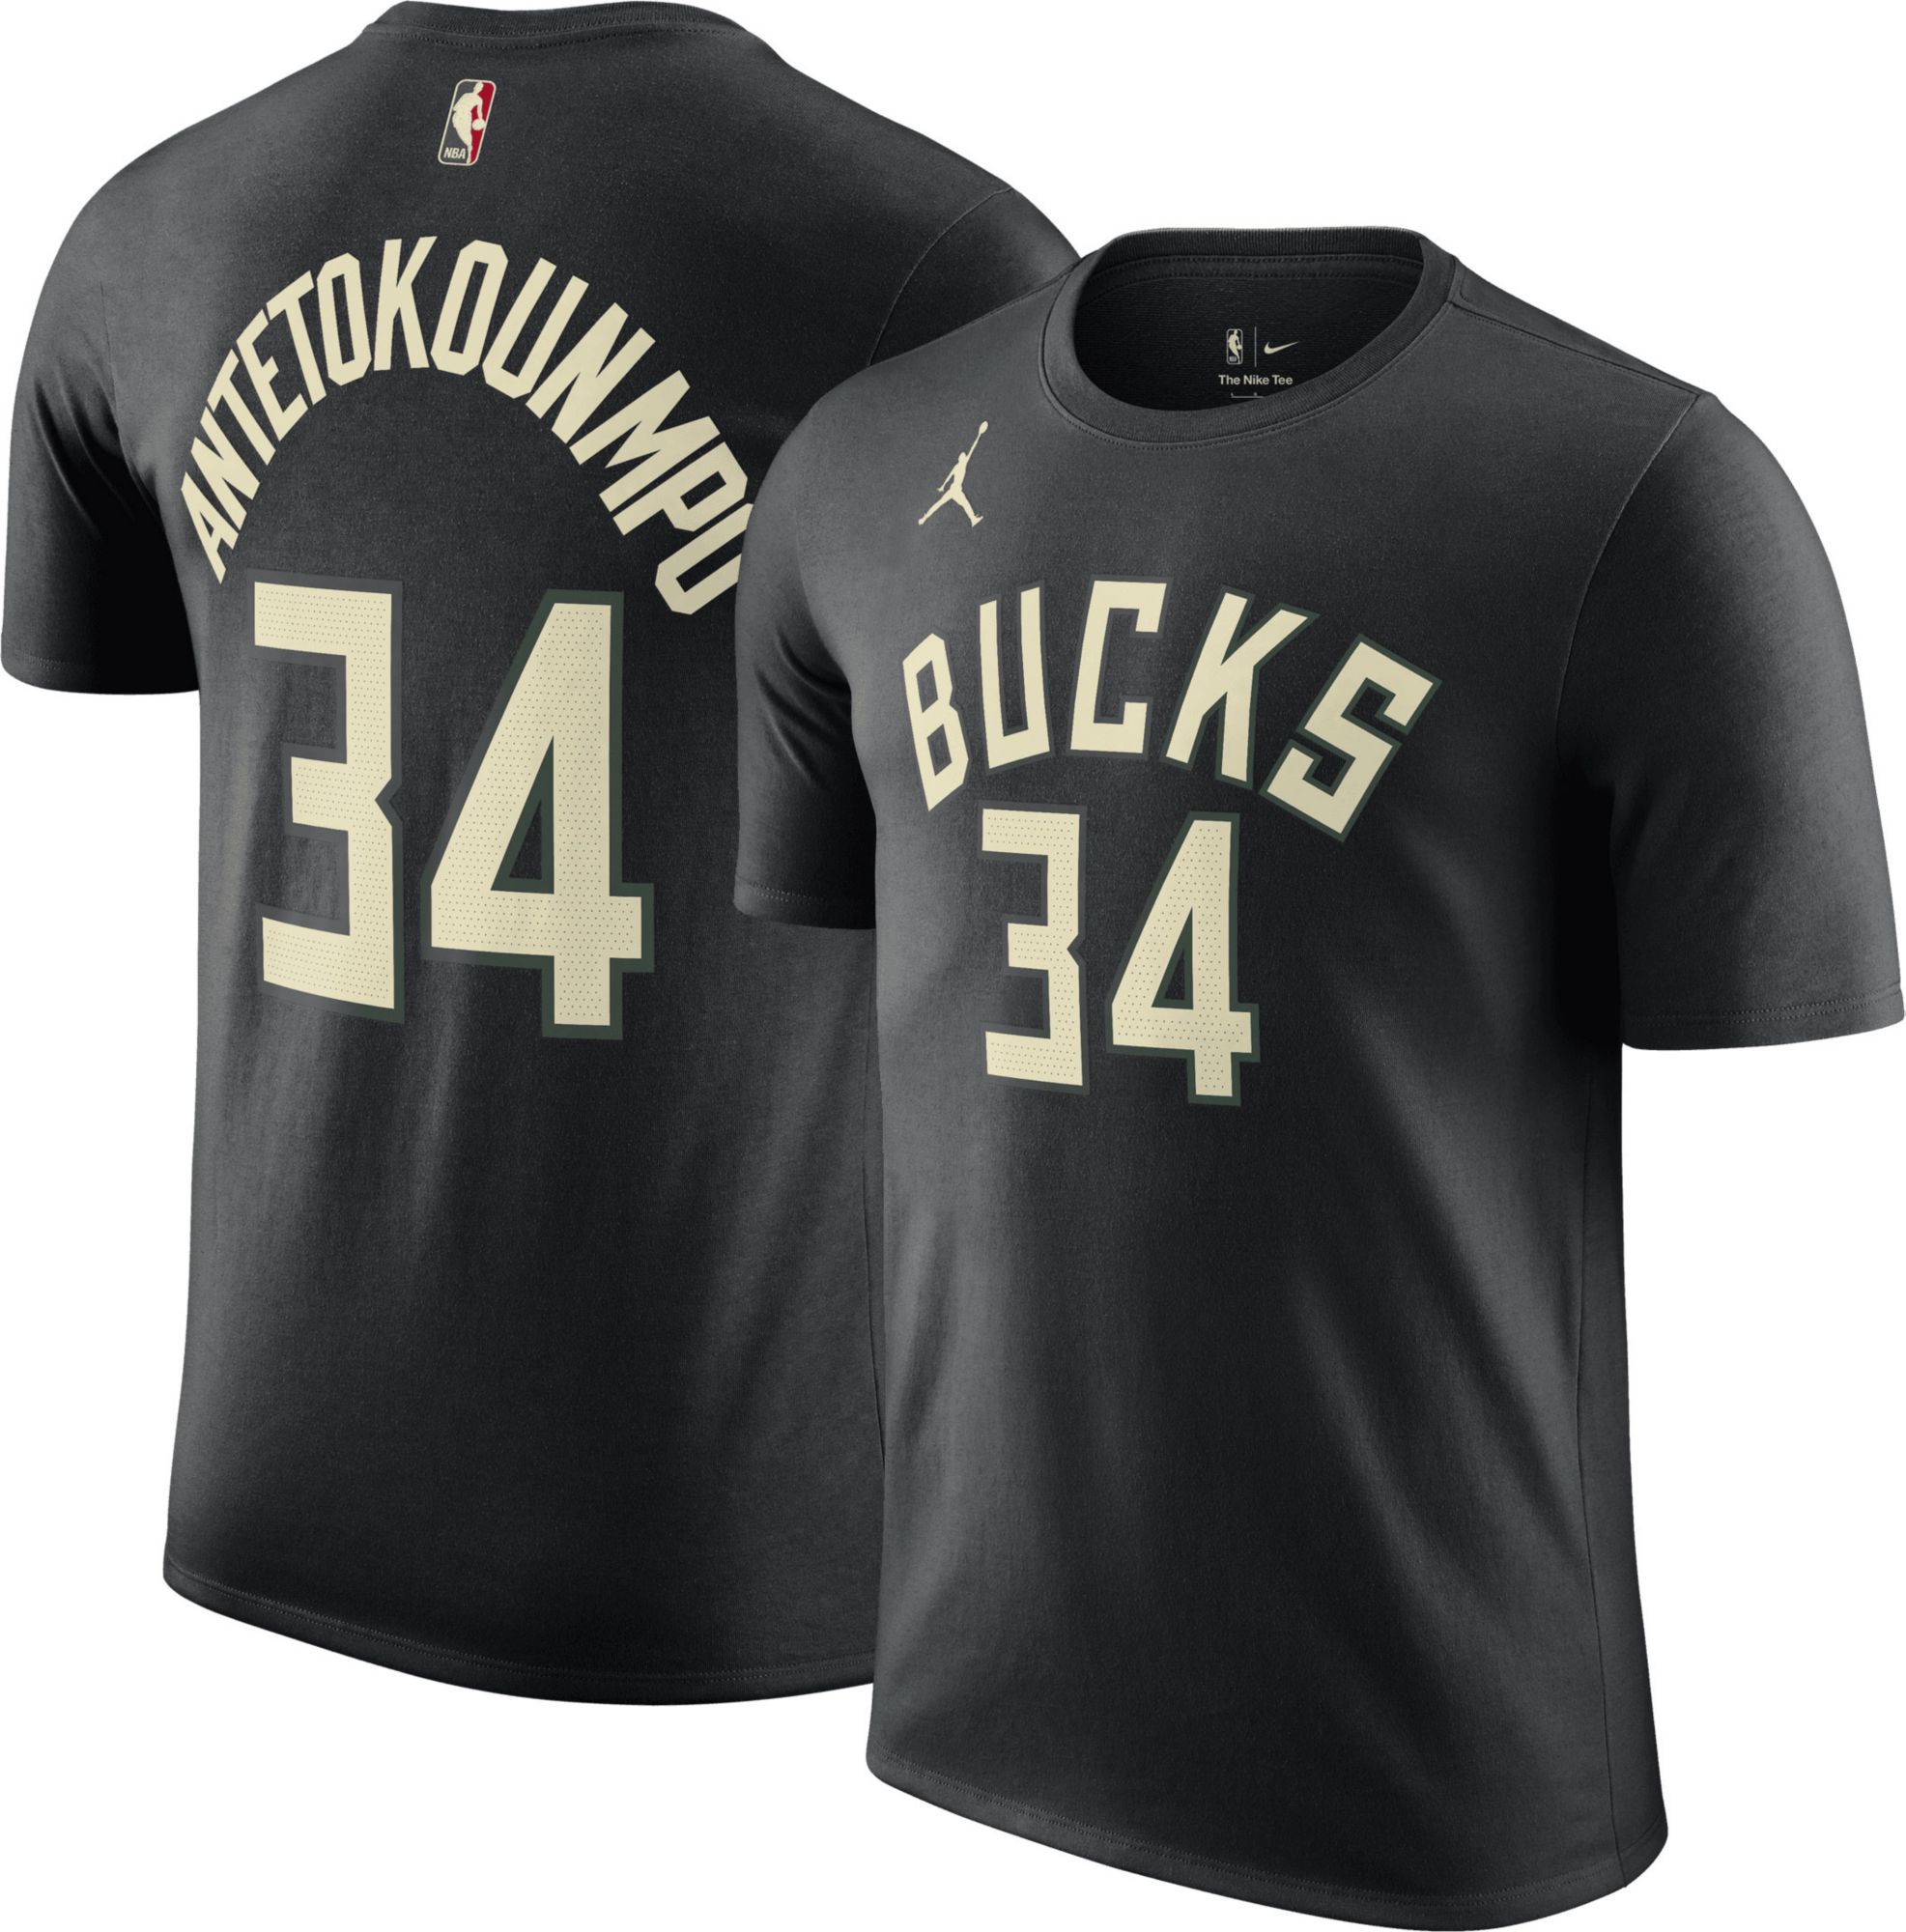 Milwaukee Brewers on X: 🎽 Giannis Crossover Basketball Jersey